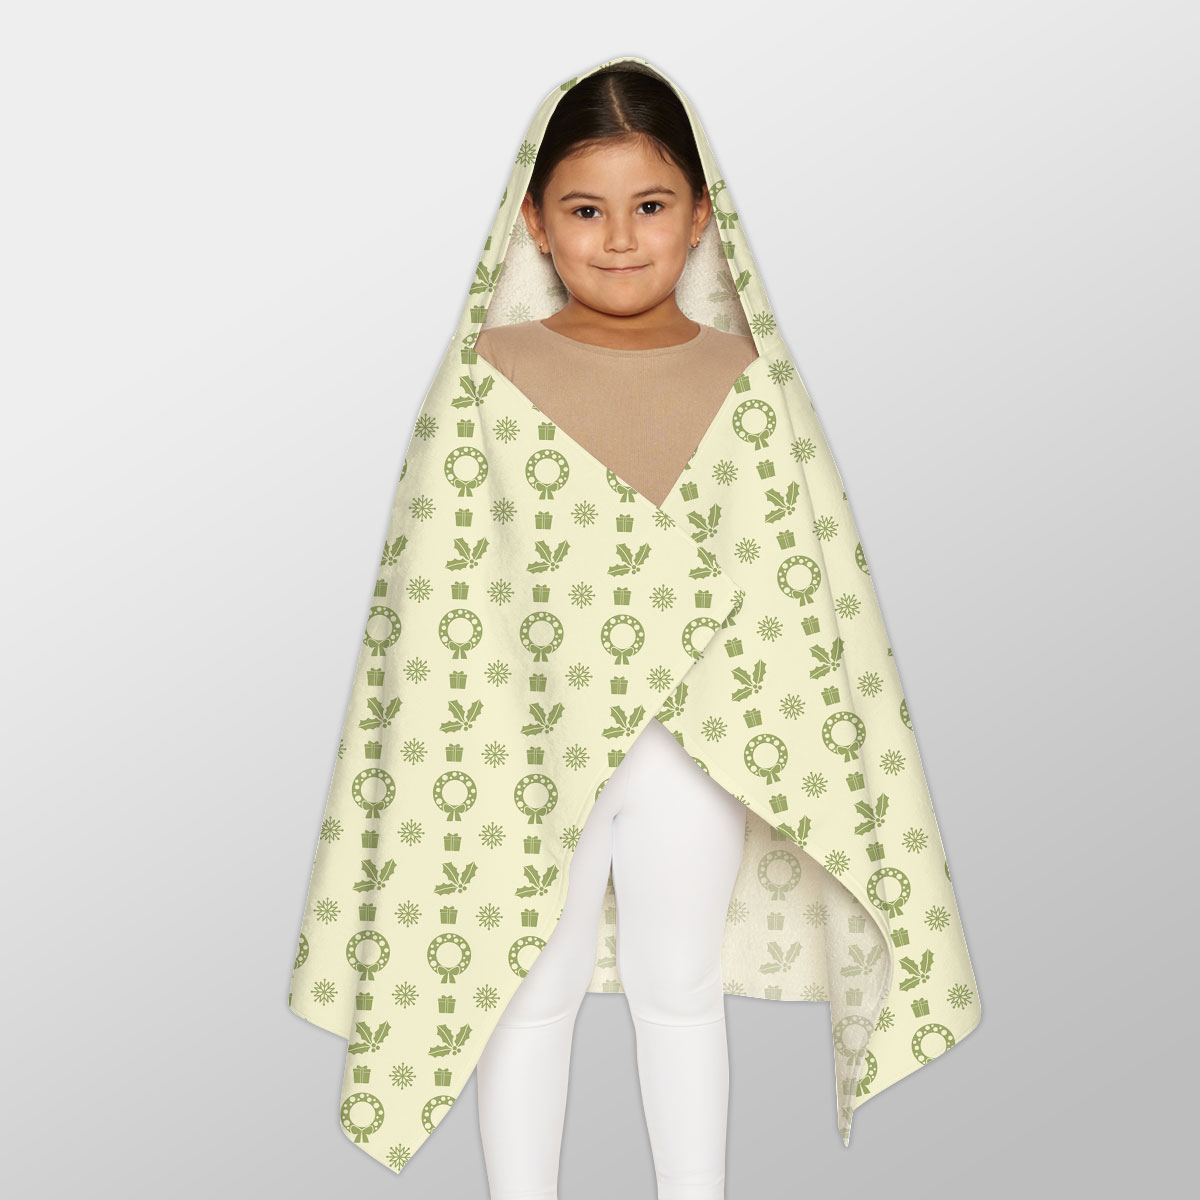 Green And Yellow Christmas Gift, Holly Leaf With Snowflake Youth Hooded Towel